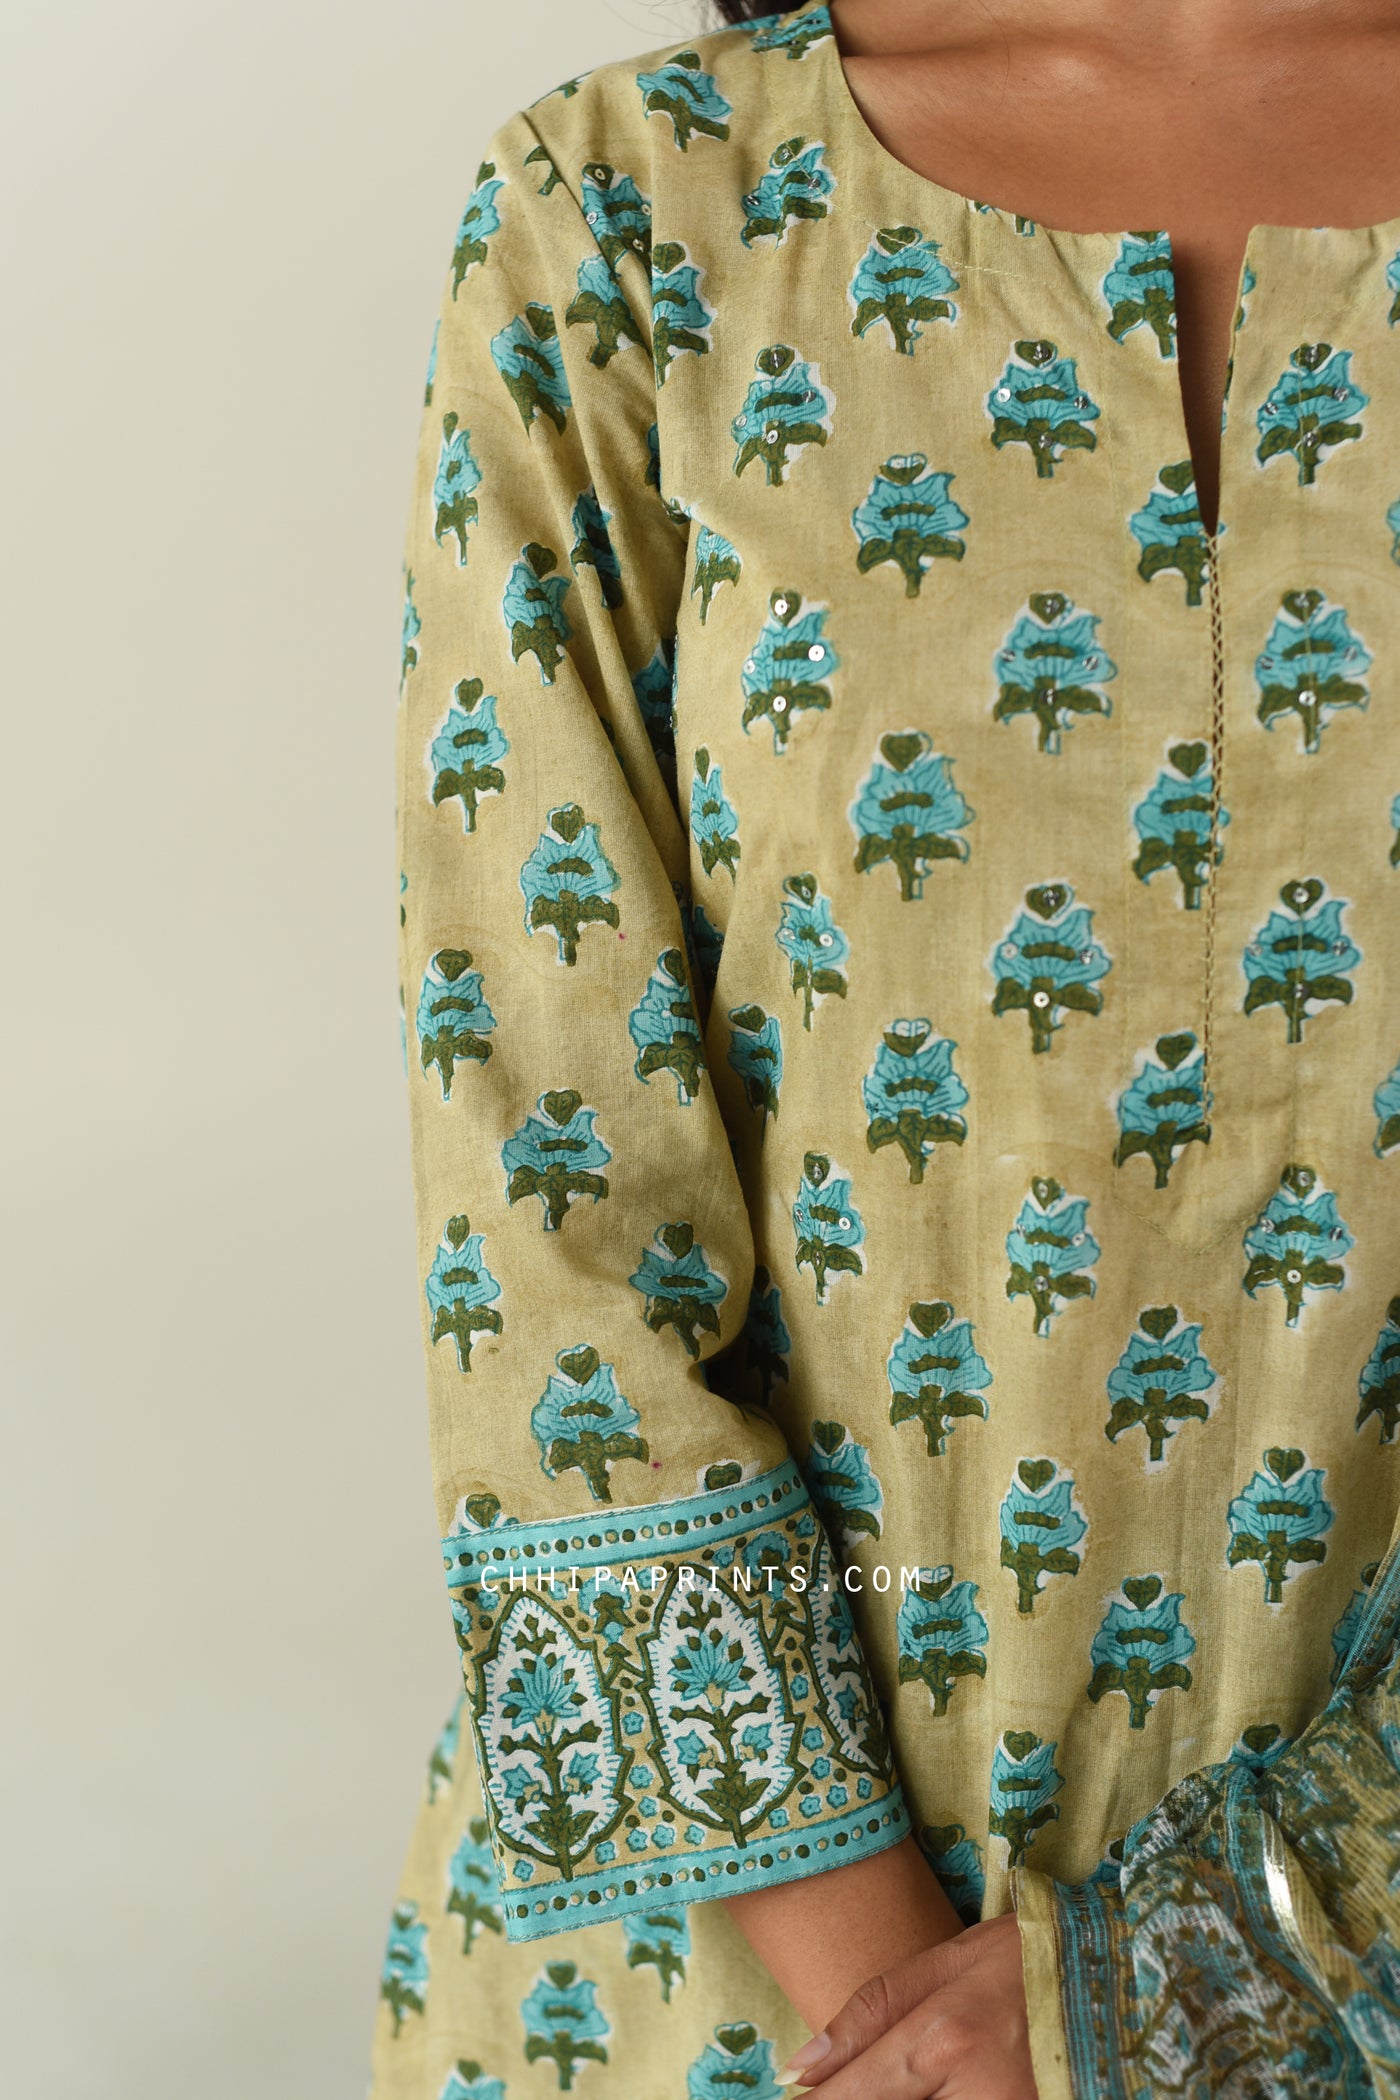 Cotton Gud Buti Block Print Suit Set in Shades of Tan and Turquoise Blue